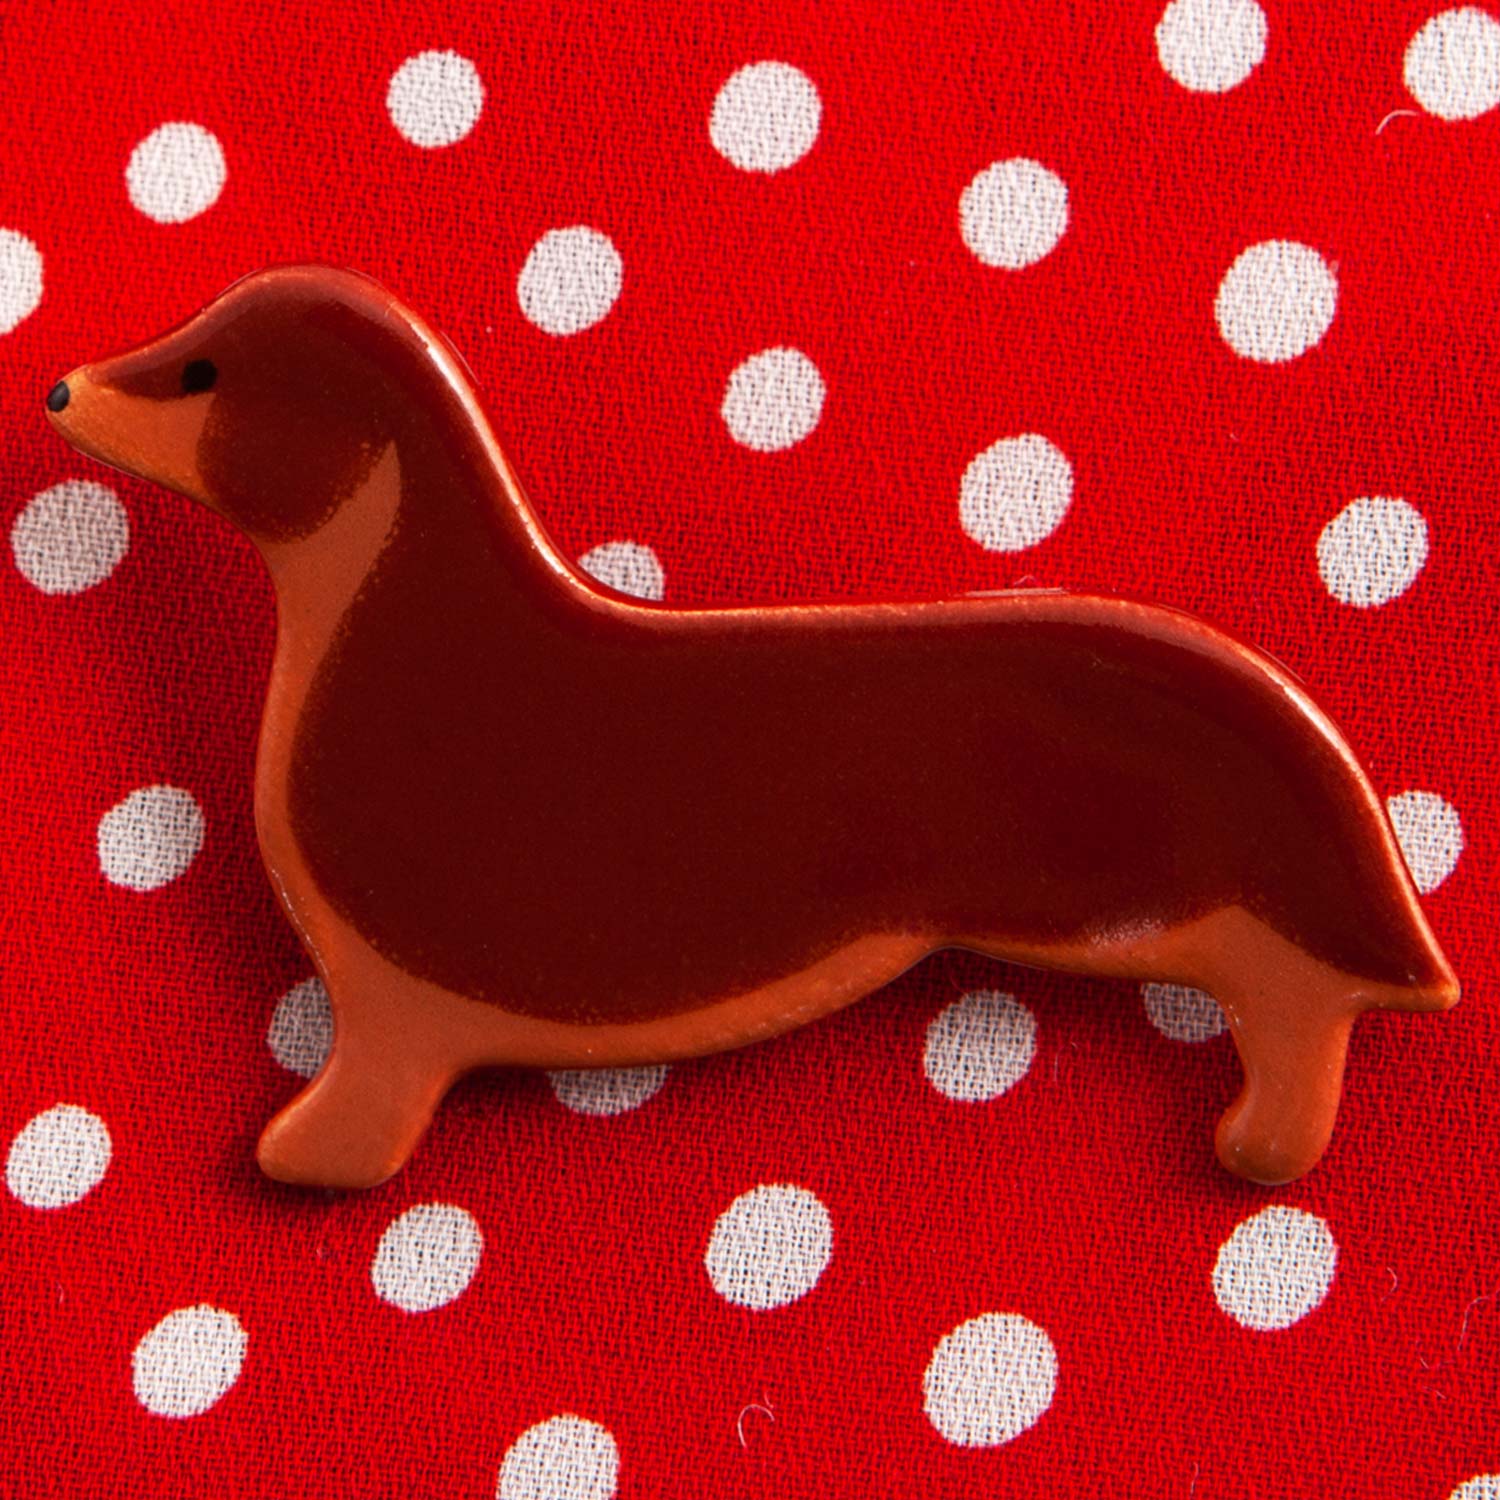 Dog Lover Gifts available at Dog Krazy Gifts – Ceramic Chocolate Labrador Brooch by Mary Goldberg of Stockwell Ceramics, Just Part Of Our Collection Of Dachshund Themed Gifts, Available At www.dogkrazygifts.co.uk